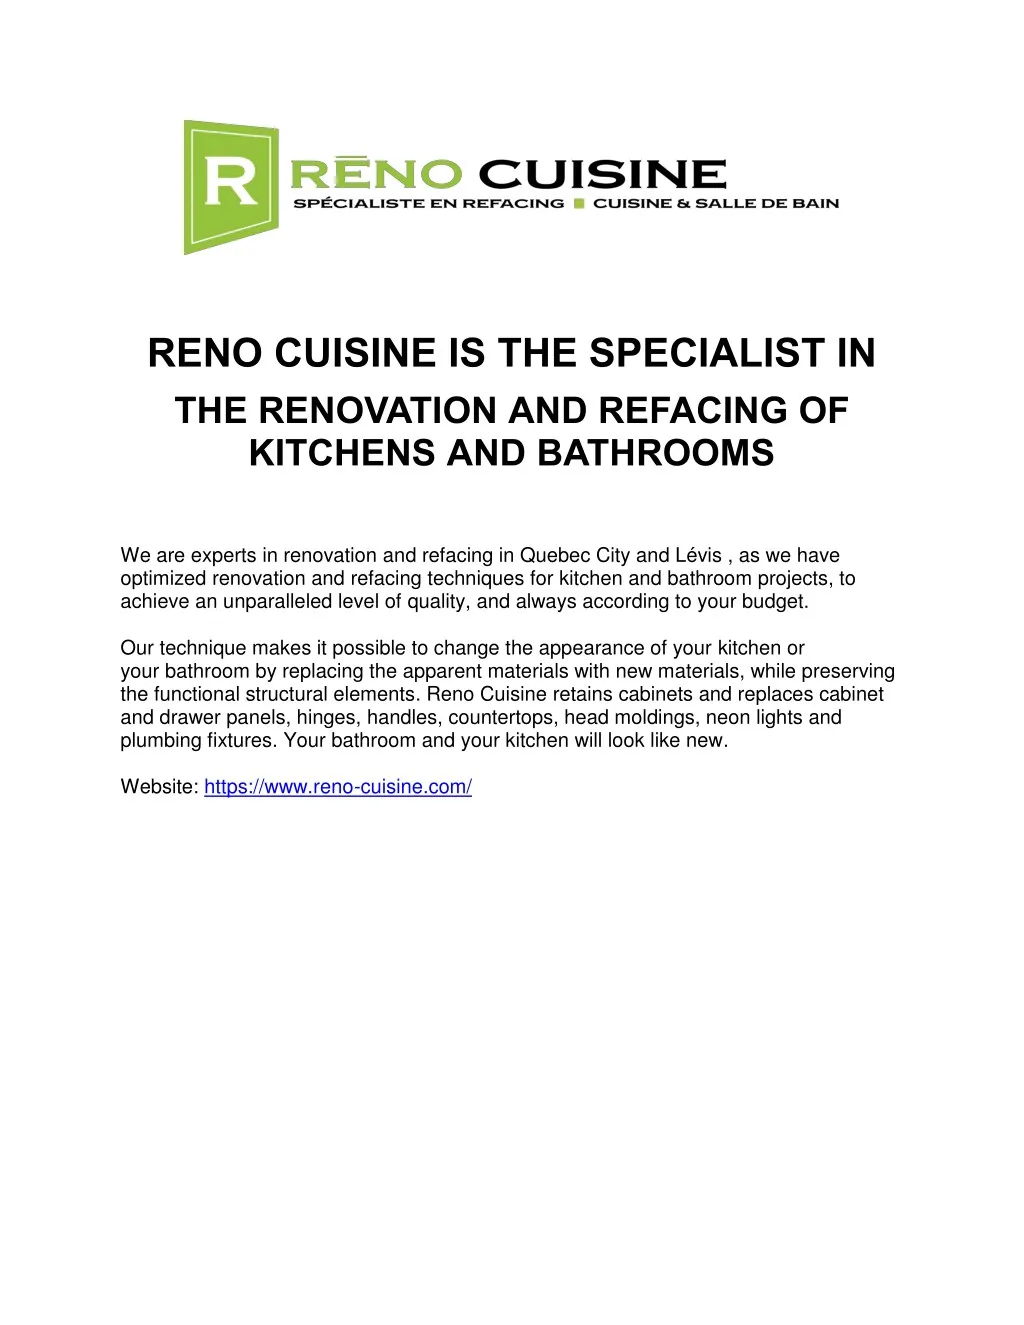 reno cuisine is the specialist in the renovation